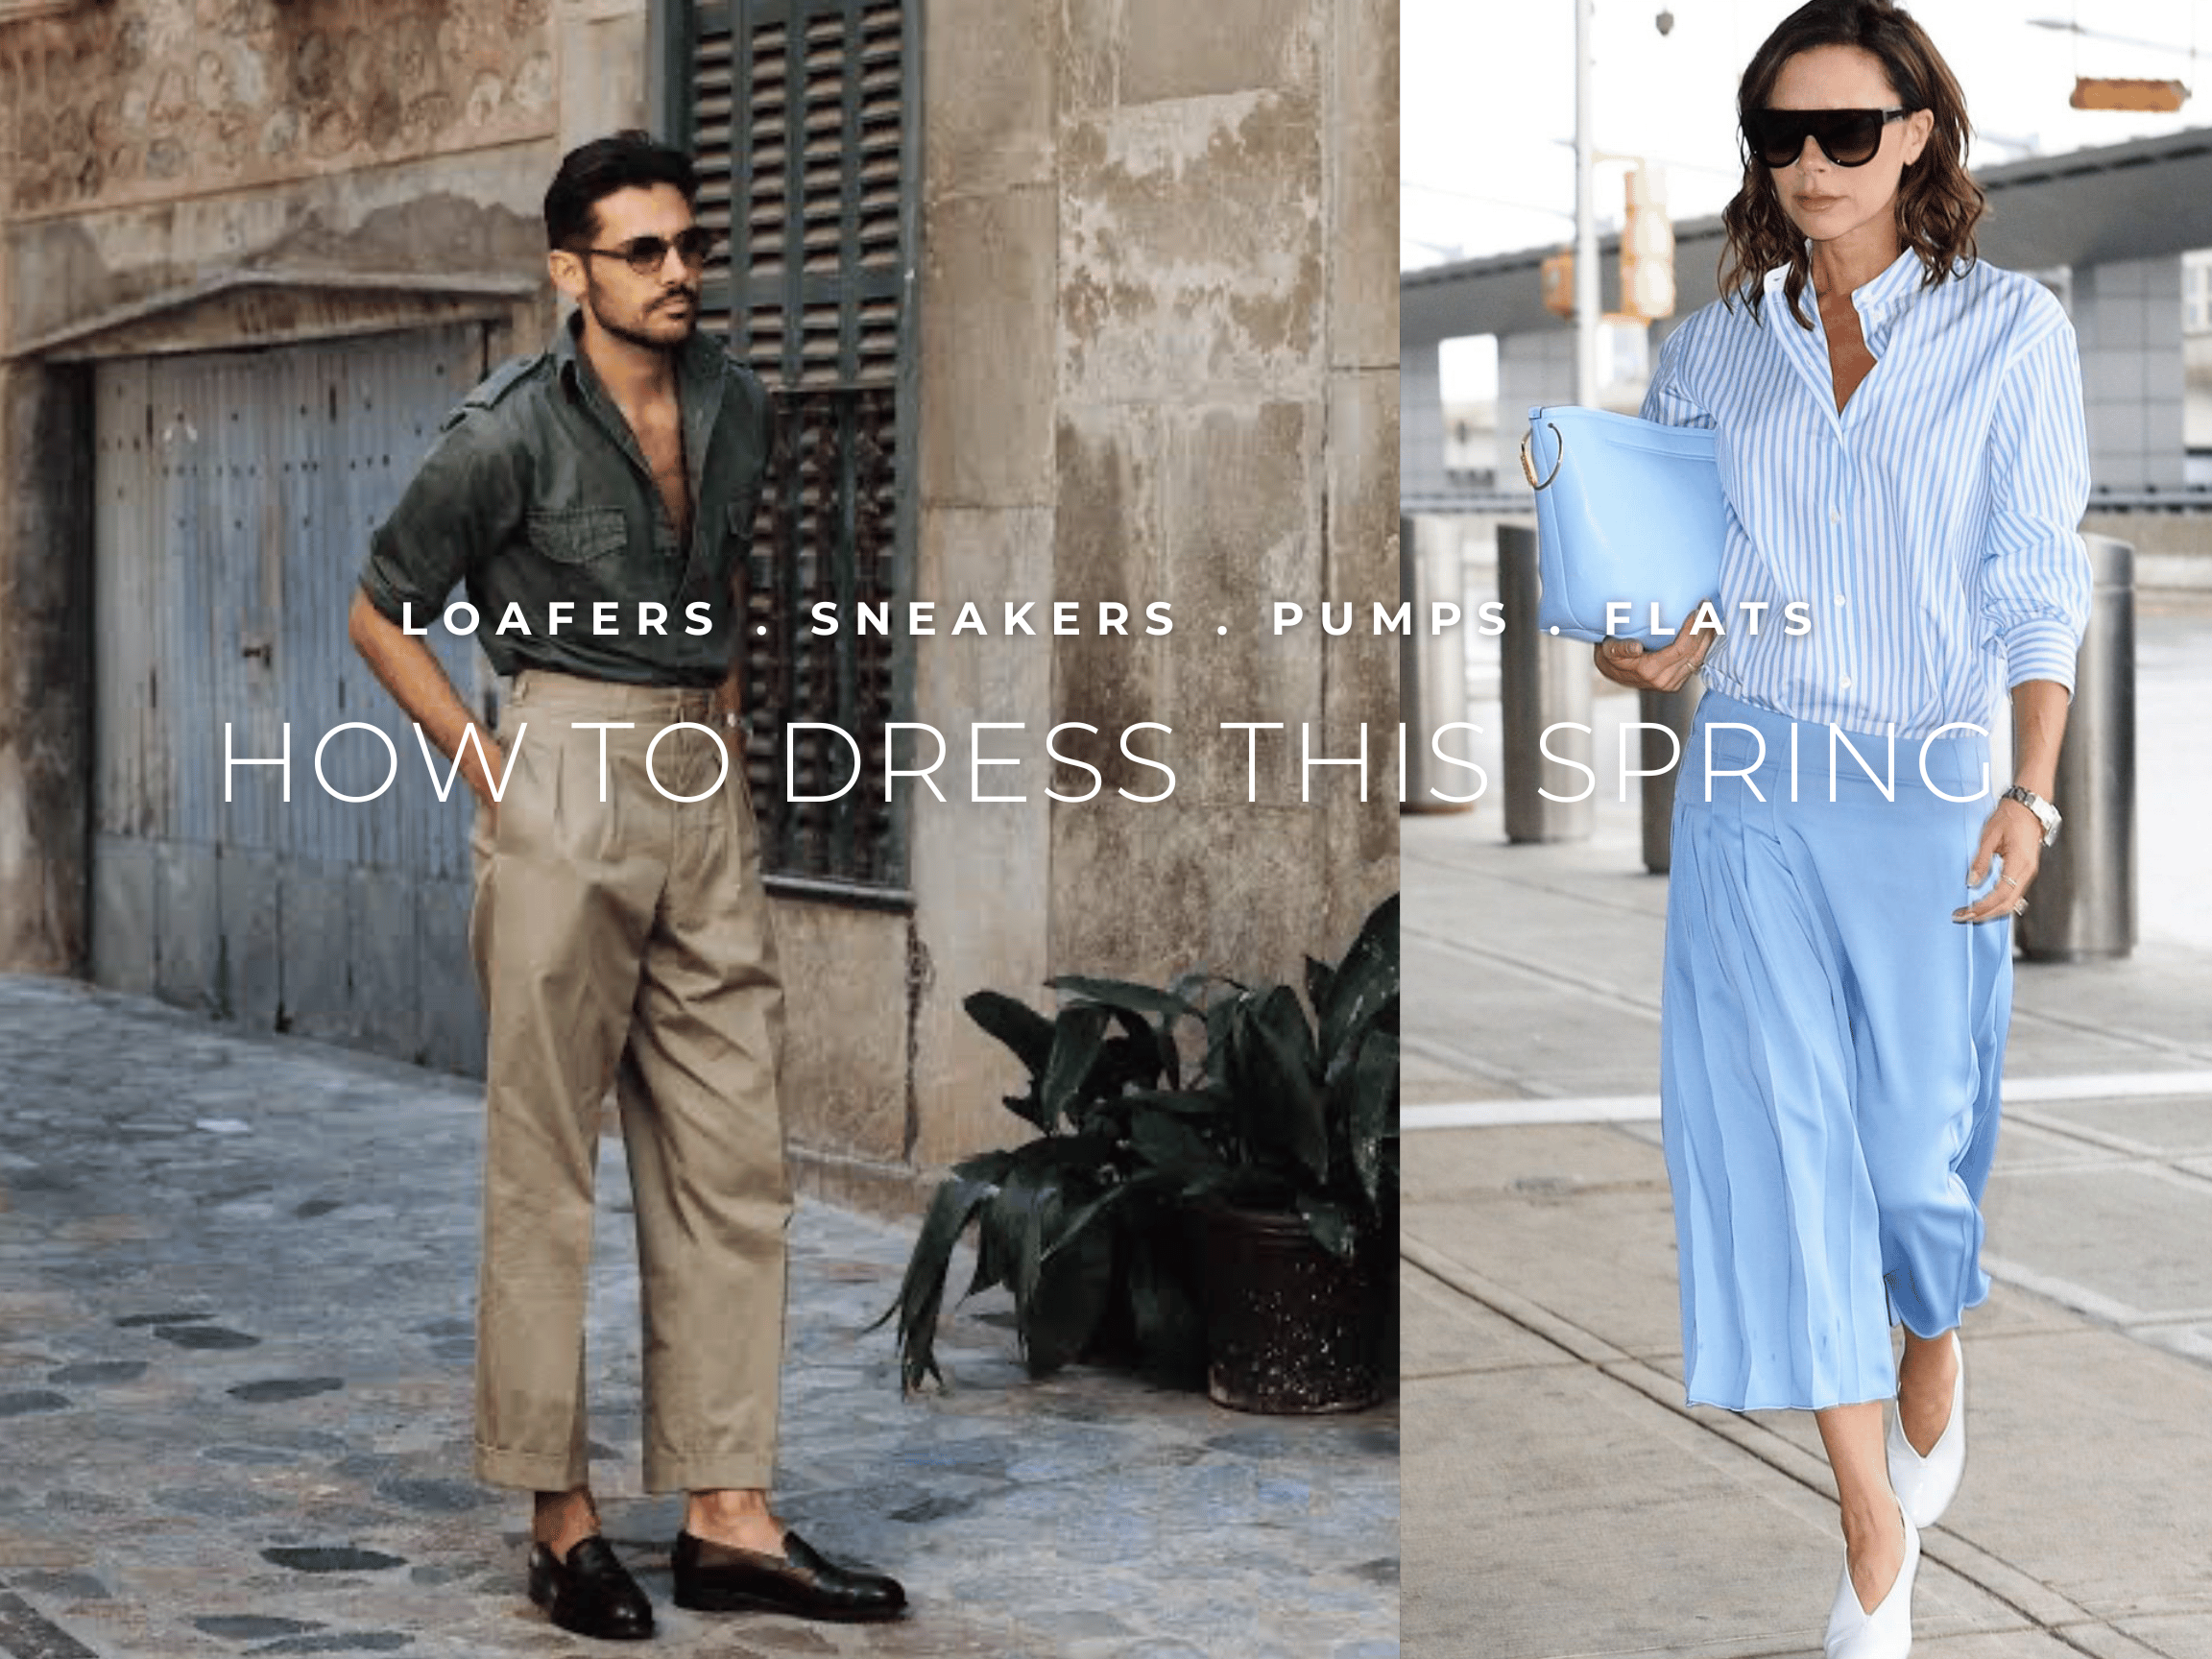 How to dress this Spring